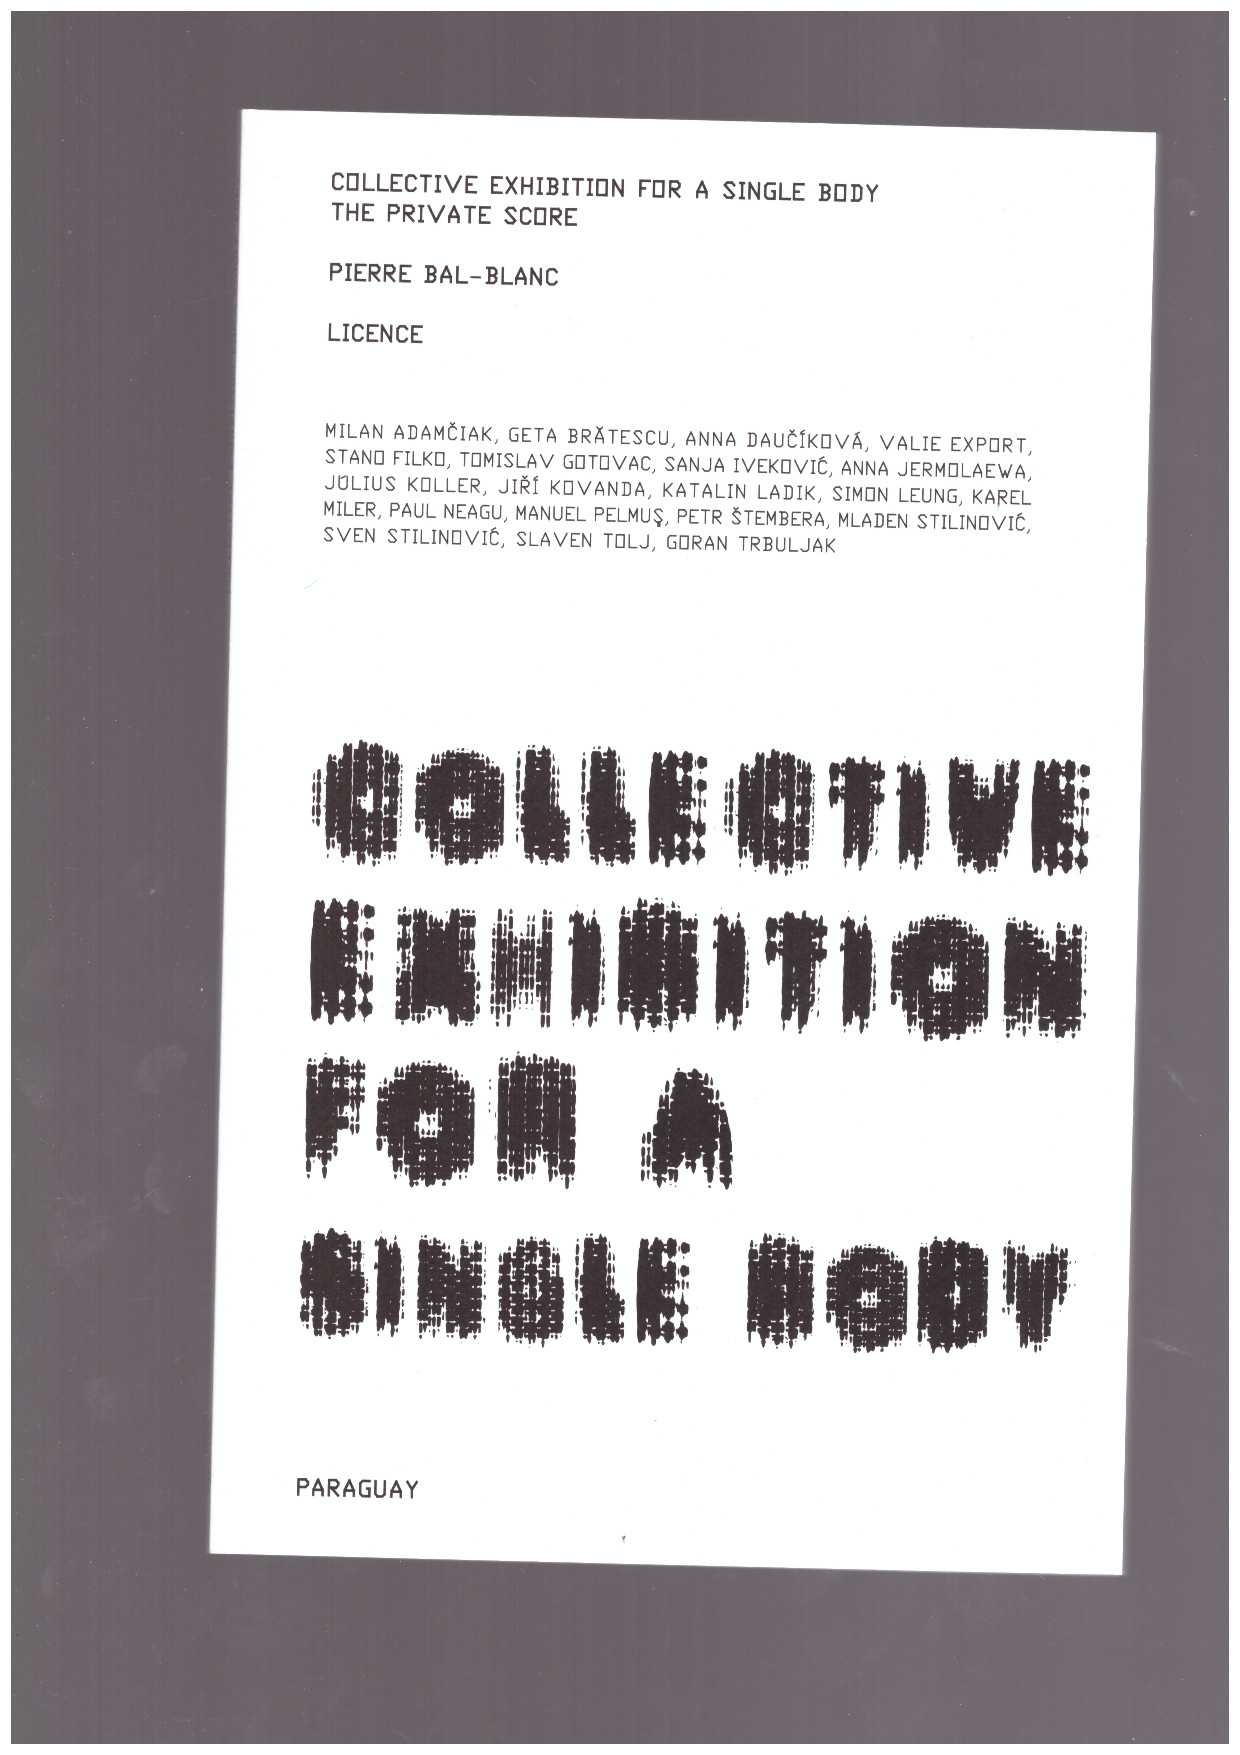 BAL-BLANC, Pierre - Collective Exhibition for a Single Body